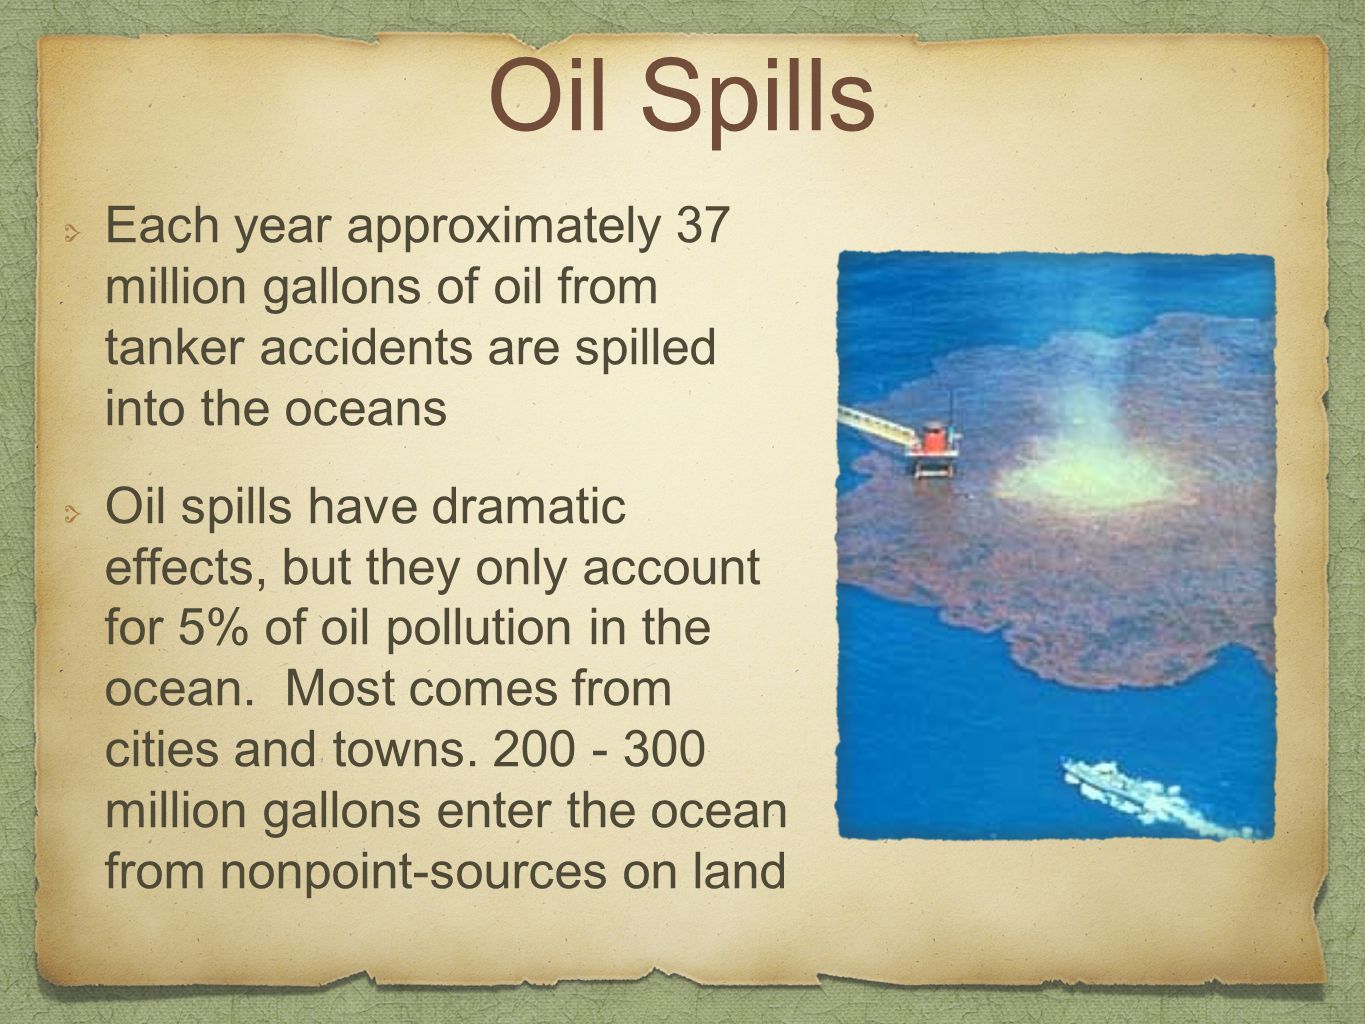 Oil Spills Each year approximately 37 million gallons of oil from tanker accidents are spilled into the oceans.